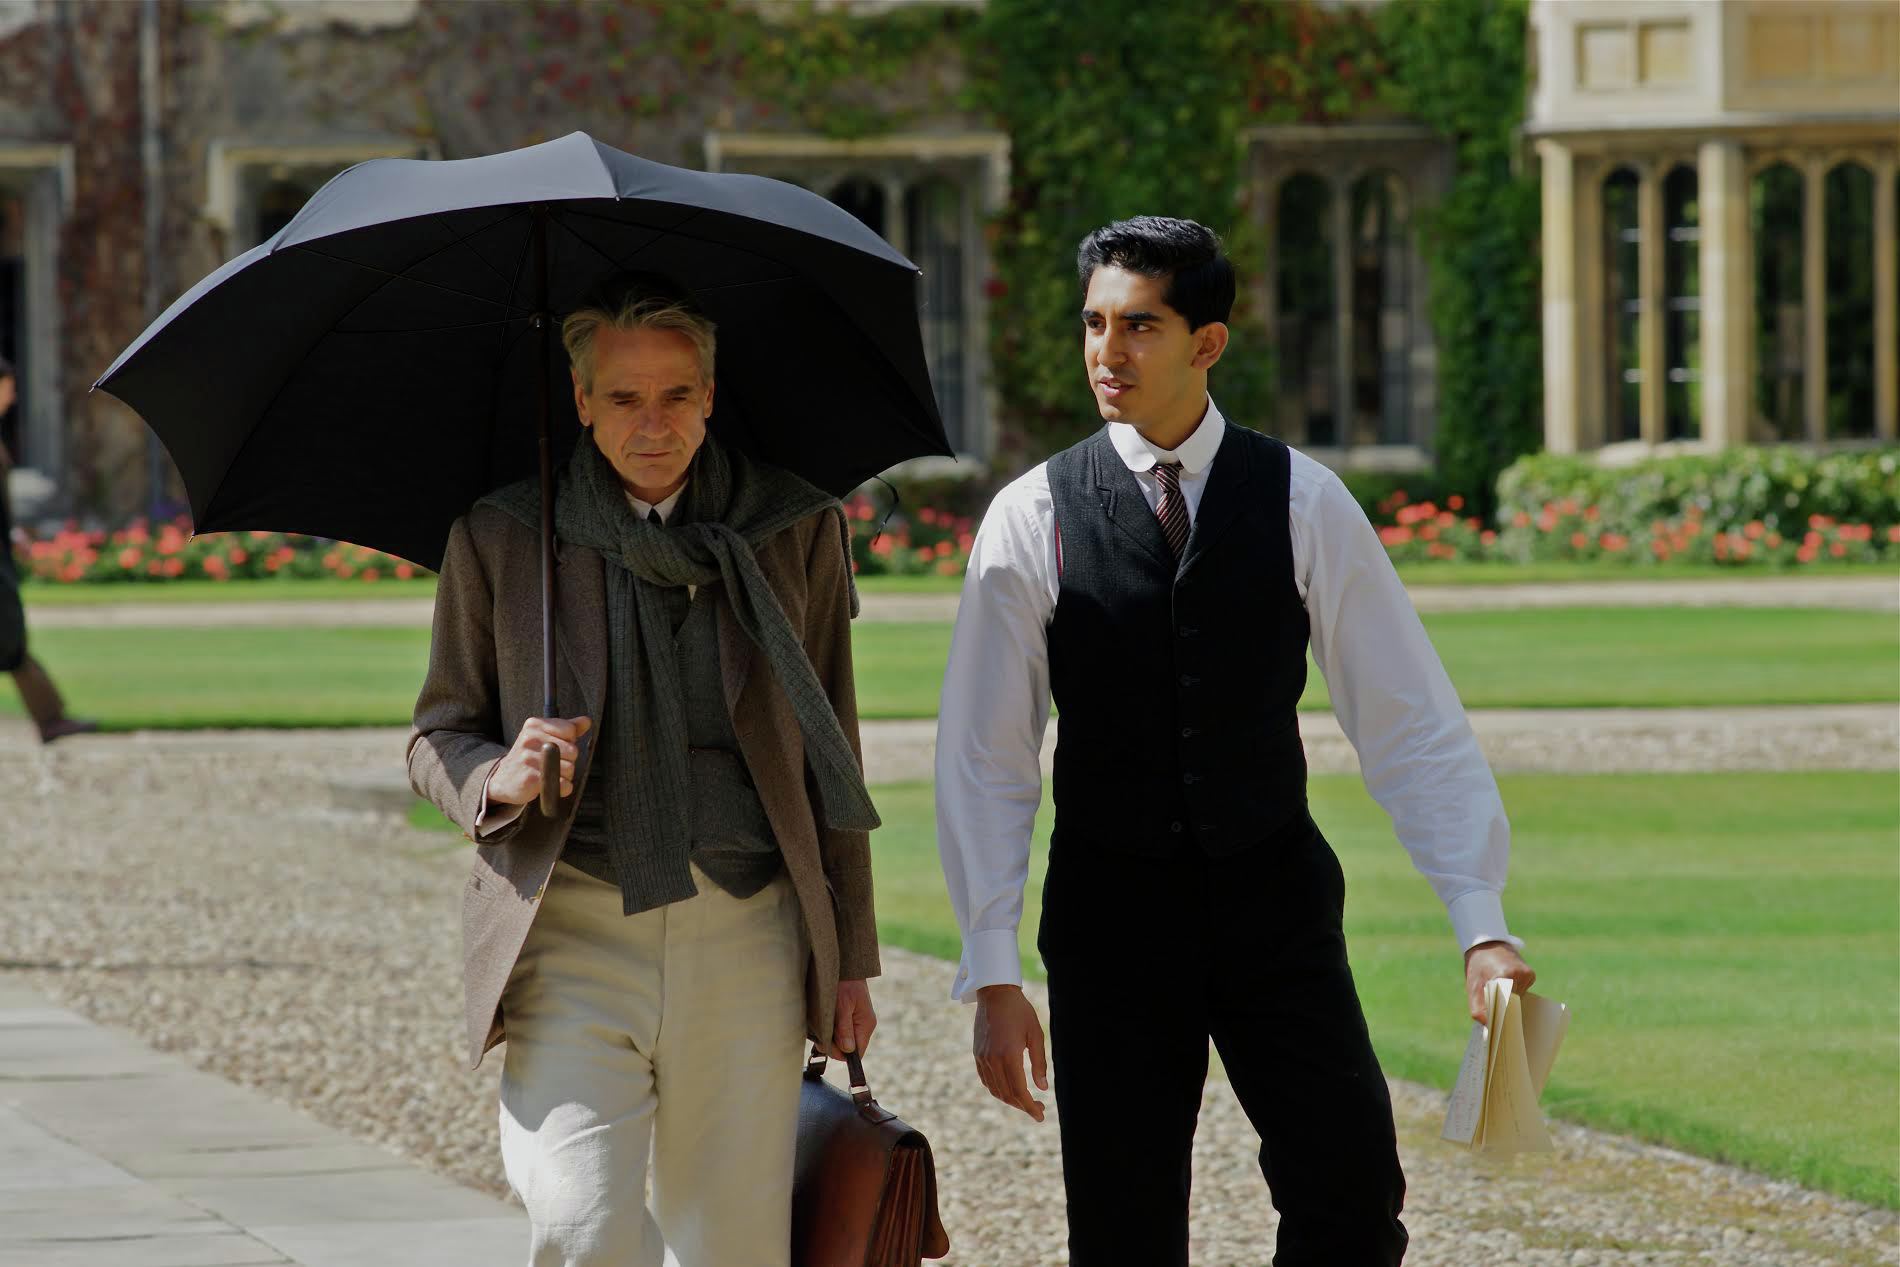 Still of Jeremy Irons and Dev Patel in The Man Who Knew Infinity (2015)